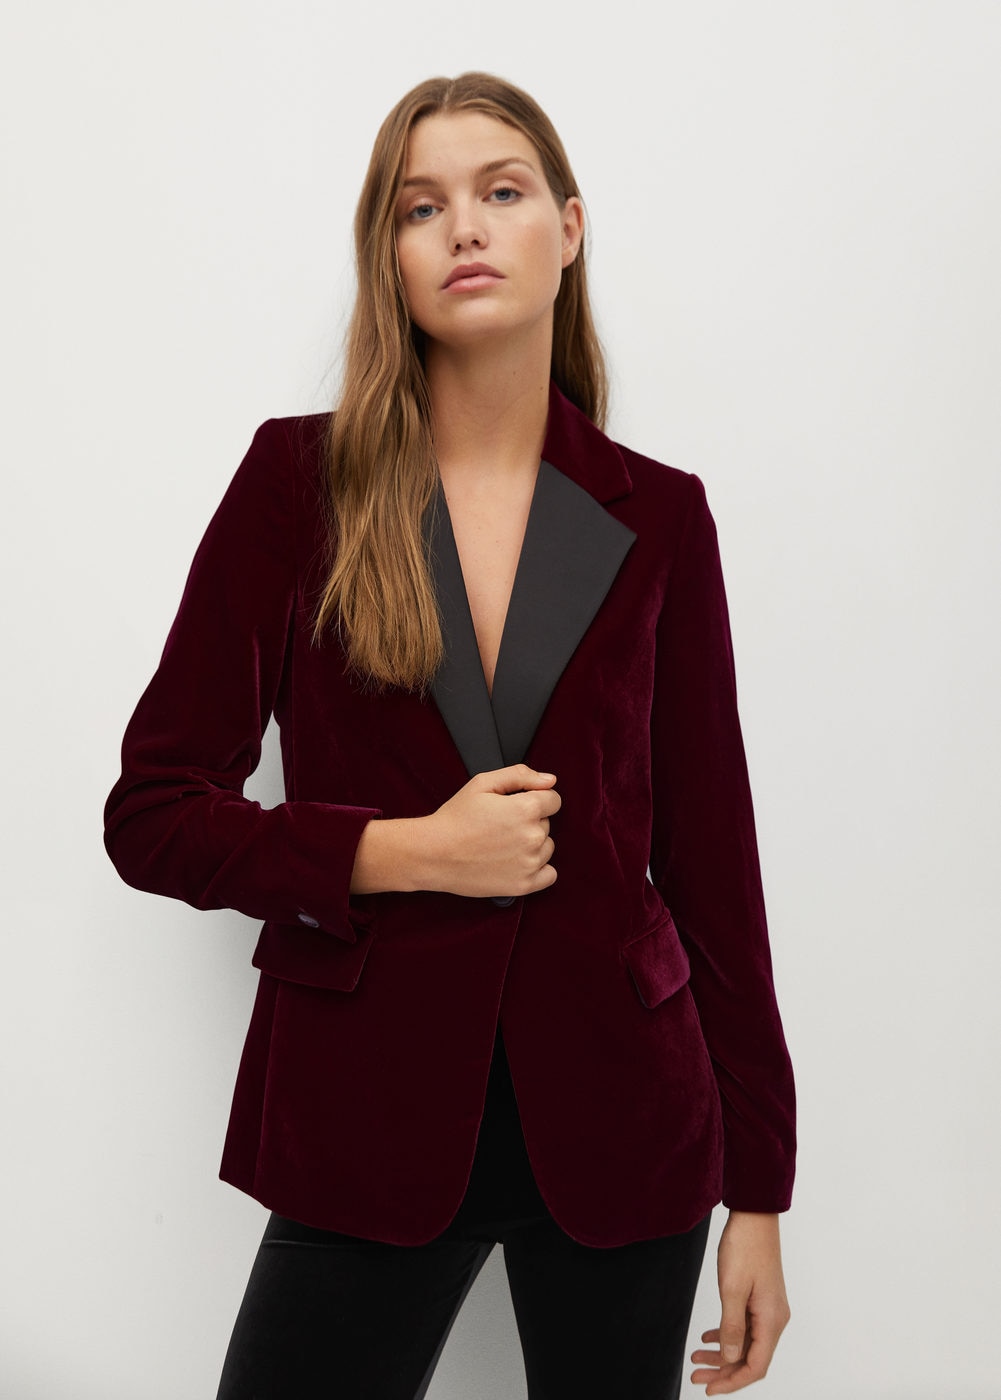 Best Velvet Blazers 2021: How To Style, Wear To Buy | vlr.eng.br